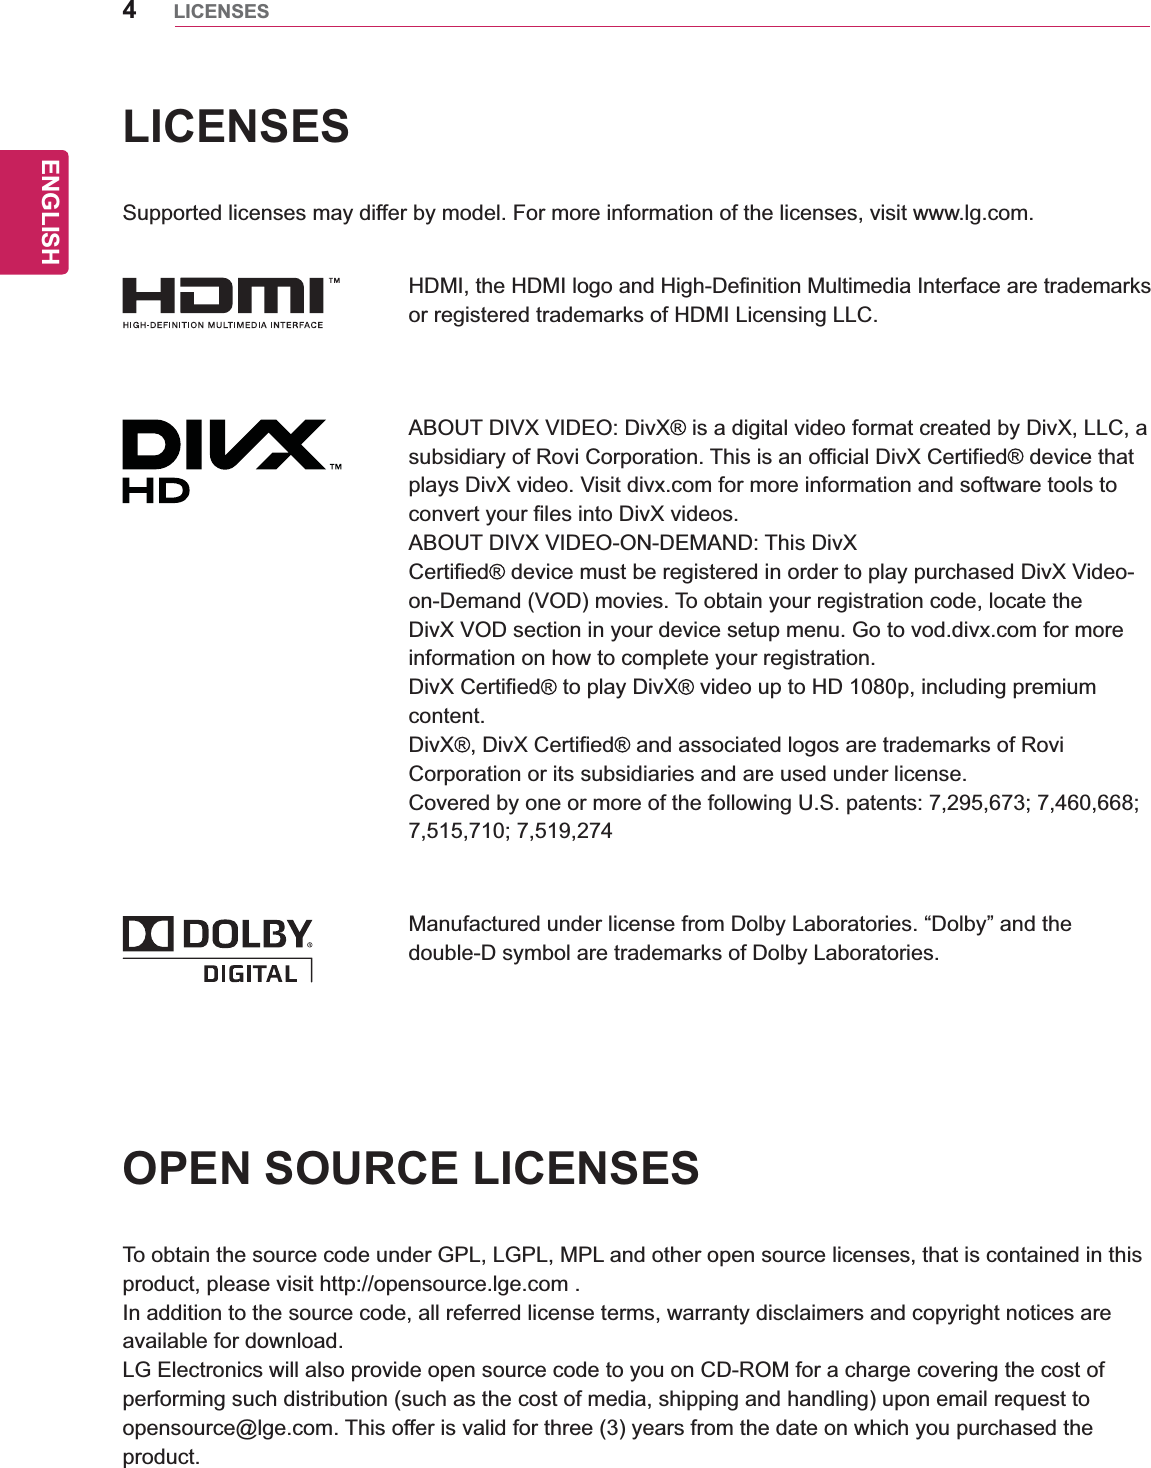 ENGLISH4LICENSESLICENSESSupported licenses may differ by model. For more information of the licenses, visit www.lg.com.HDMI, the HDMI logo and High-Definition Multimedia Interface are trademarks or registered trademarks of HDMI Licensing LLC.ABOUT DIVX VIDEO: DivX  is a digital video format created by DivX, LLC, a subsidiary of Rovi Corporation. This is an official DivX Certified  device that plays DivX video. Visit divx.com for more information and software tools to convert your files into DivX videos.ABOUT DIVX VIDEO-ON-DEMAND: This DivXCertified  device must be registered in order to play purchased DivX Video-on-Demand (VOD) movies. To obtain your registration code, locate the DivX VOD section in your device setup menu. Go to vod.divx.com for more information on how to complete your registration.DivX Certified  to play DivX  video up to HD 1080p, including premium content.DivX , DivX Certified  and associated logos are trademarks of Rovi Corporation or its subsidiaries and are used under license.Covered by one or more of the following U.S. patents: 7,295,673; 7,460,668; 7,515,710; 7,519,274Manufactured under license from Dolby Laboratories. “Dolby” and the double-D symbol are trademarks of Dolby Laboratories.OPEN SOURCE LICENSESTo obtain the source code under GPL, LGPL, MPL and other open source licenses, that is contained in this product, please visit http://opensource.lge.com .In addition to the source code, all referred license terms, warranty disclaimers and copyright notices are available for download.LG Electronics will also provide open source code to you on CD-ROM for a charge covering the cost of performing such distribution (such as the cost of media, shipping and handling) upon email request to opensource@lge.com. This offer is valid for three (3) years from the date on which you purchased the product.